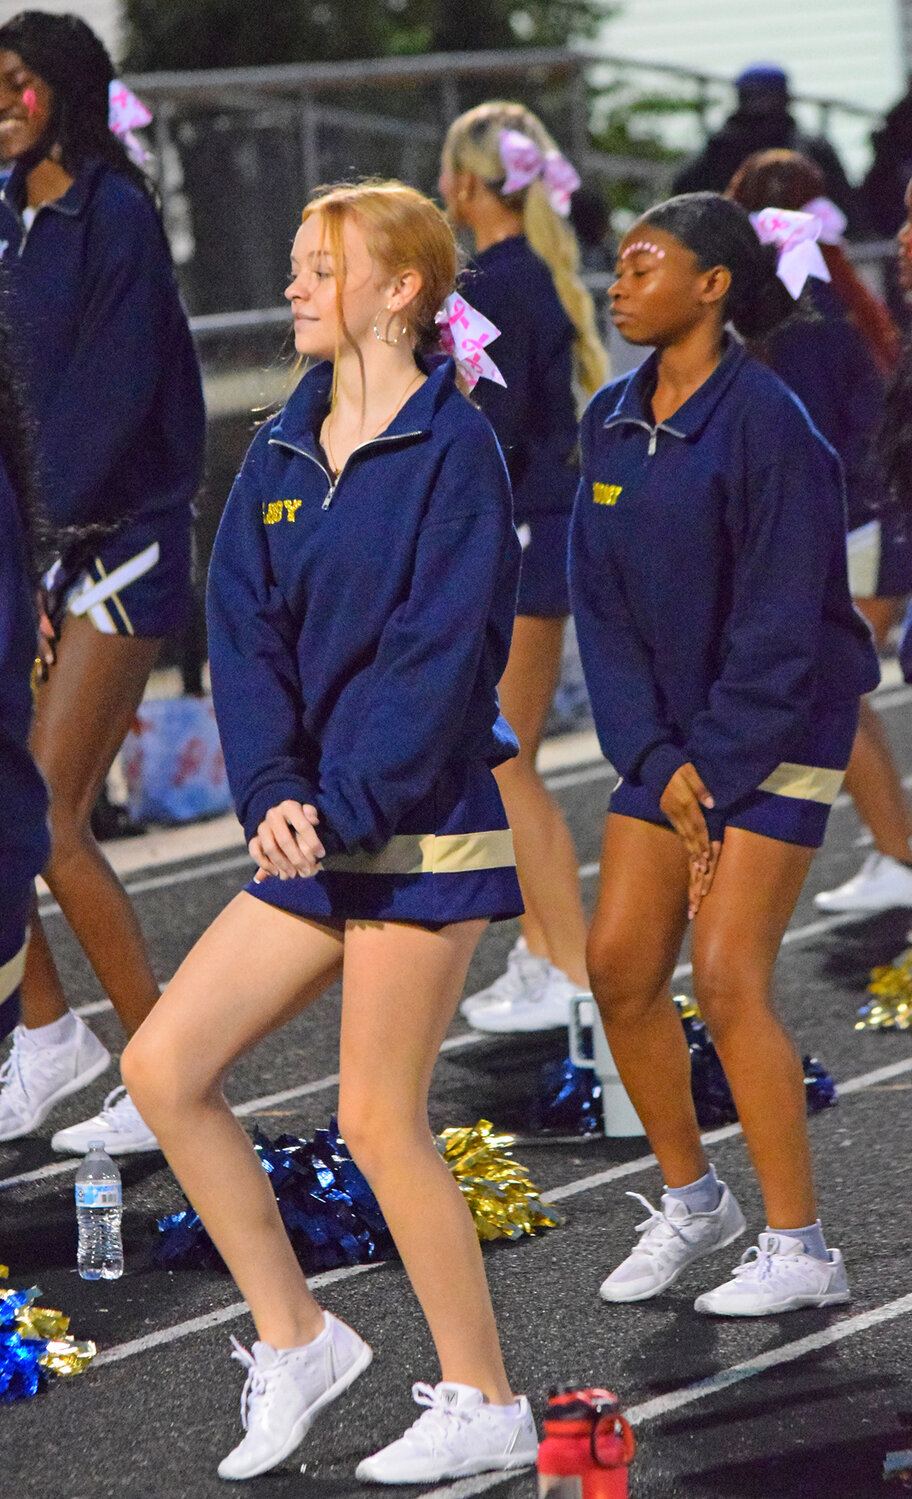 Gabby Blake and the other girls Viking cheerleaders didn't let the rain stop them from encouraging the team and the crowd.